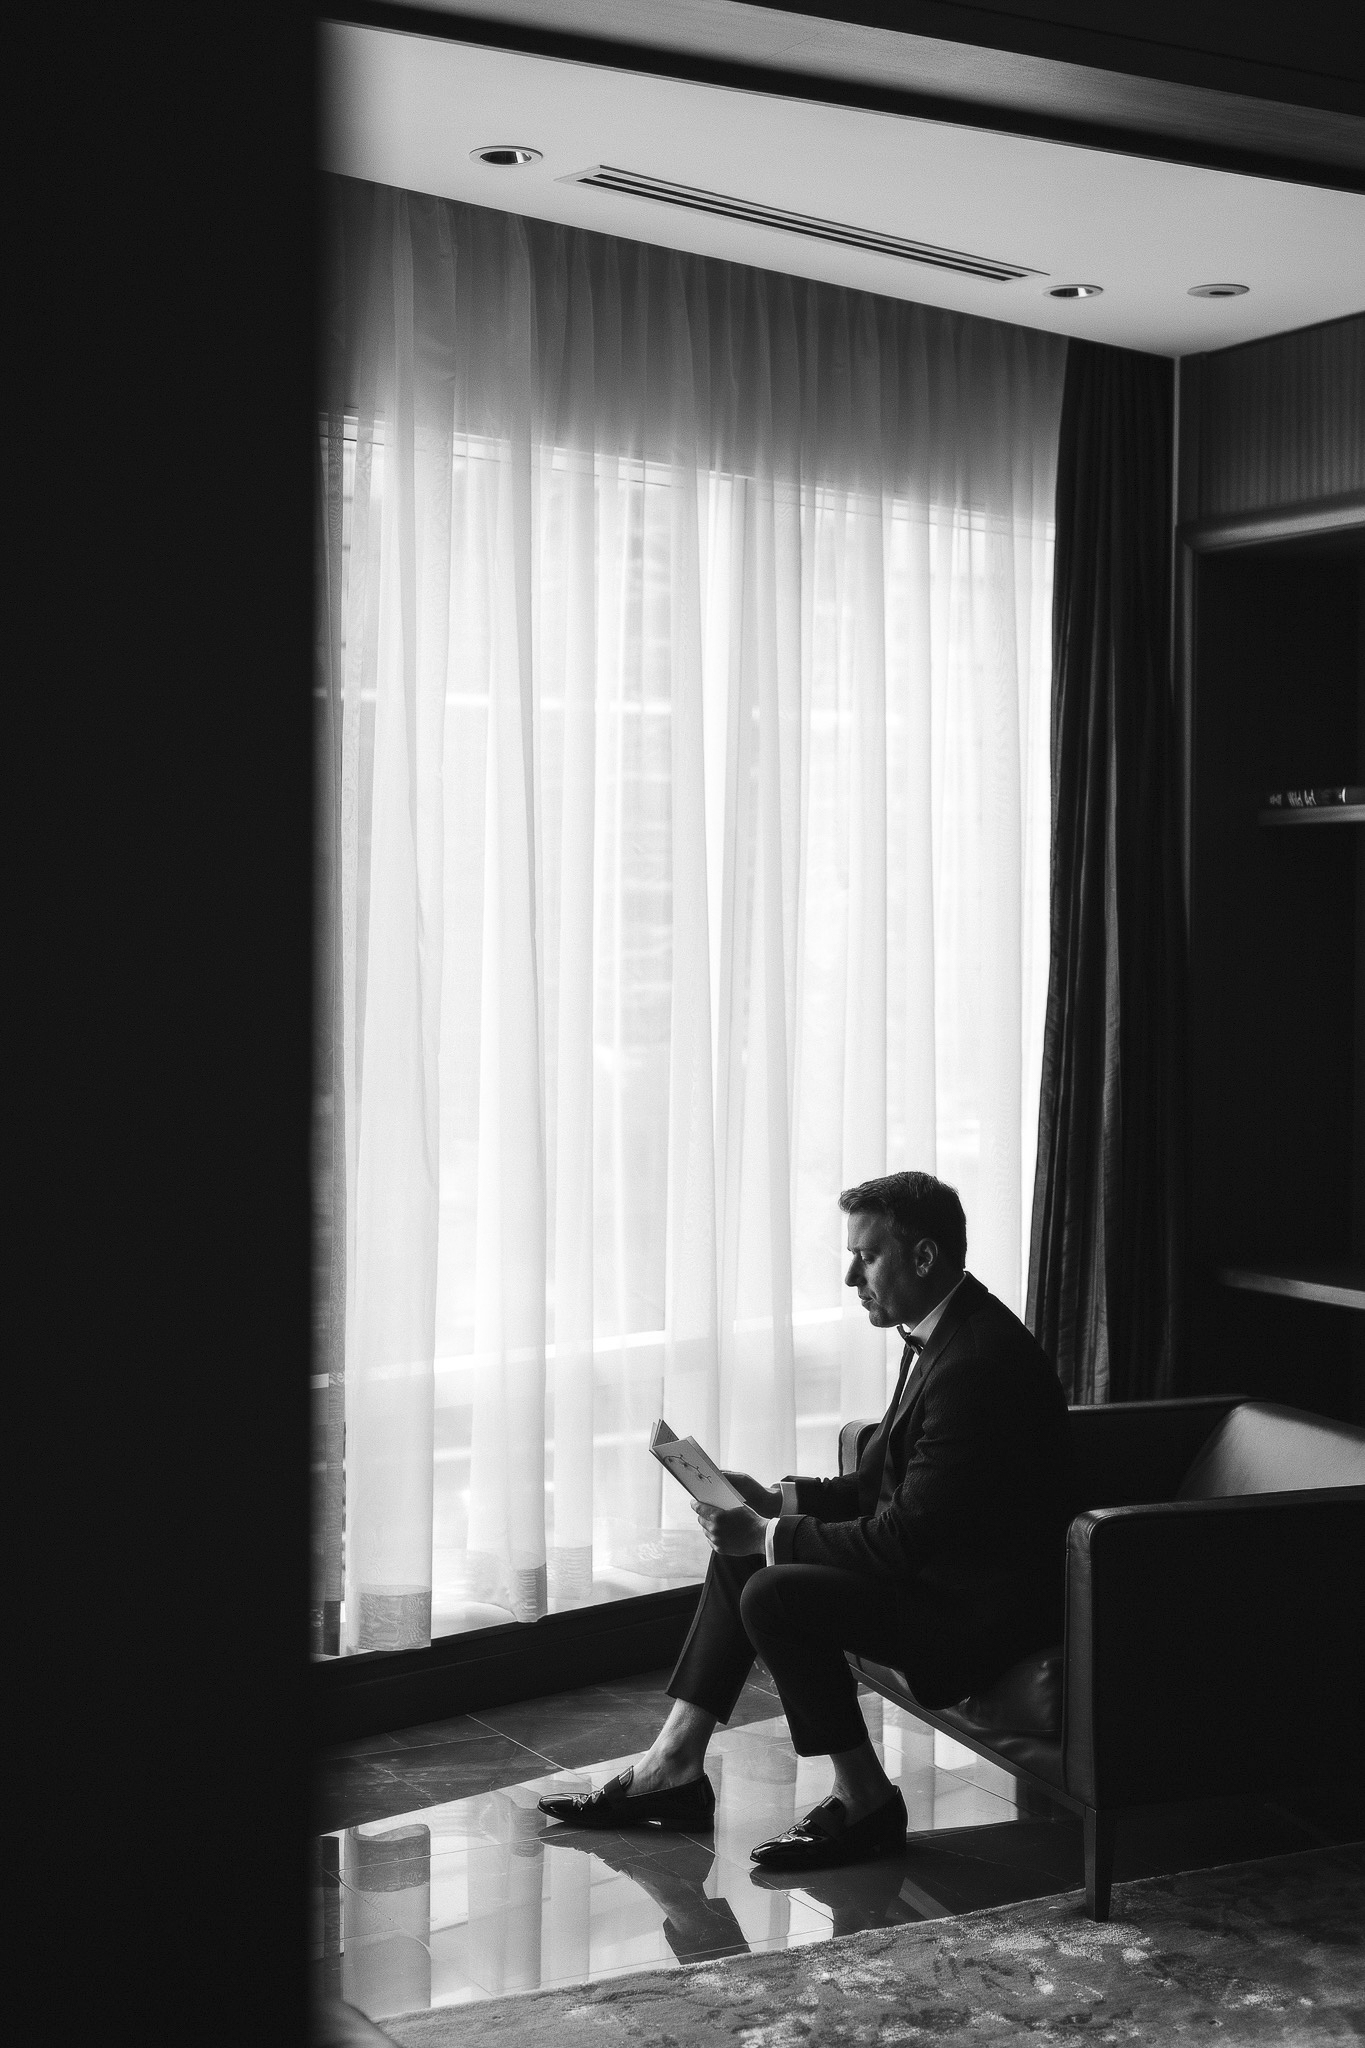 Groom reading card from bride in hotel suite.